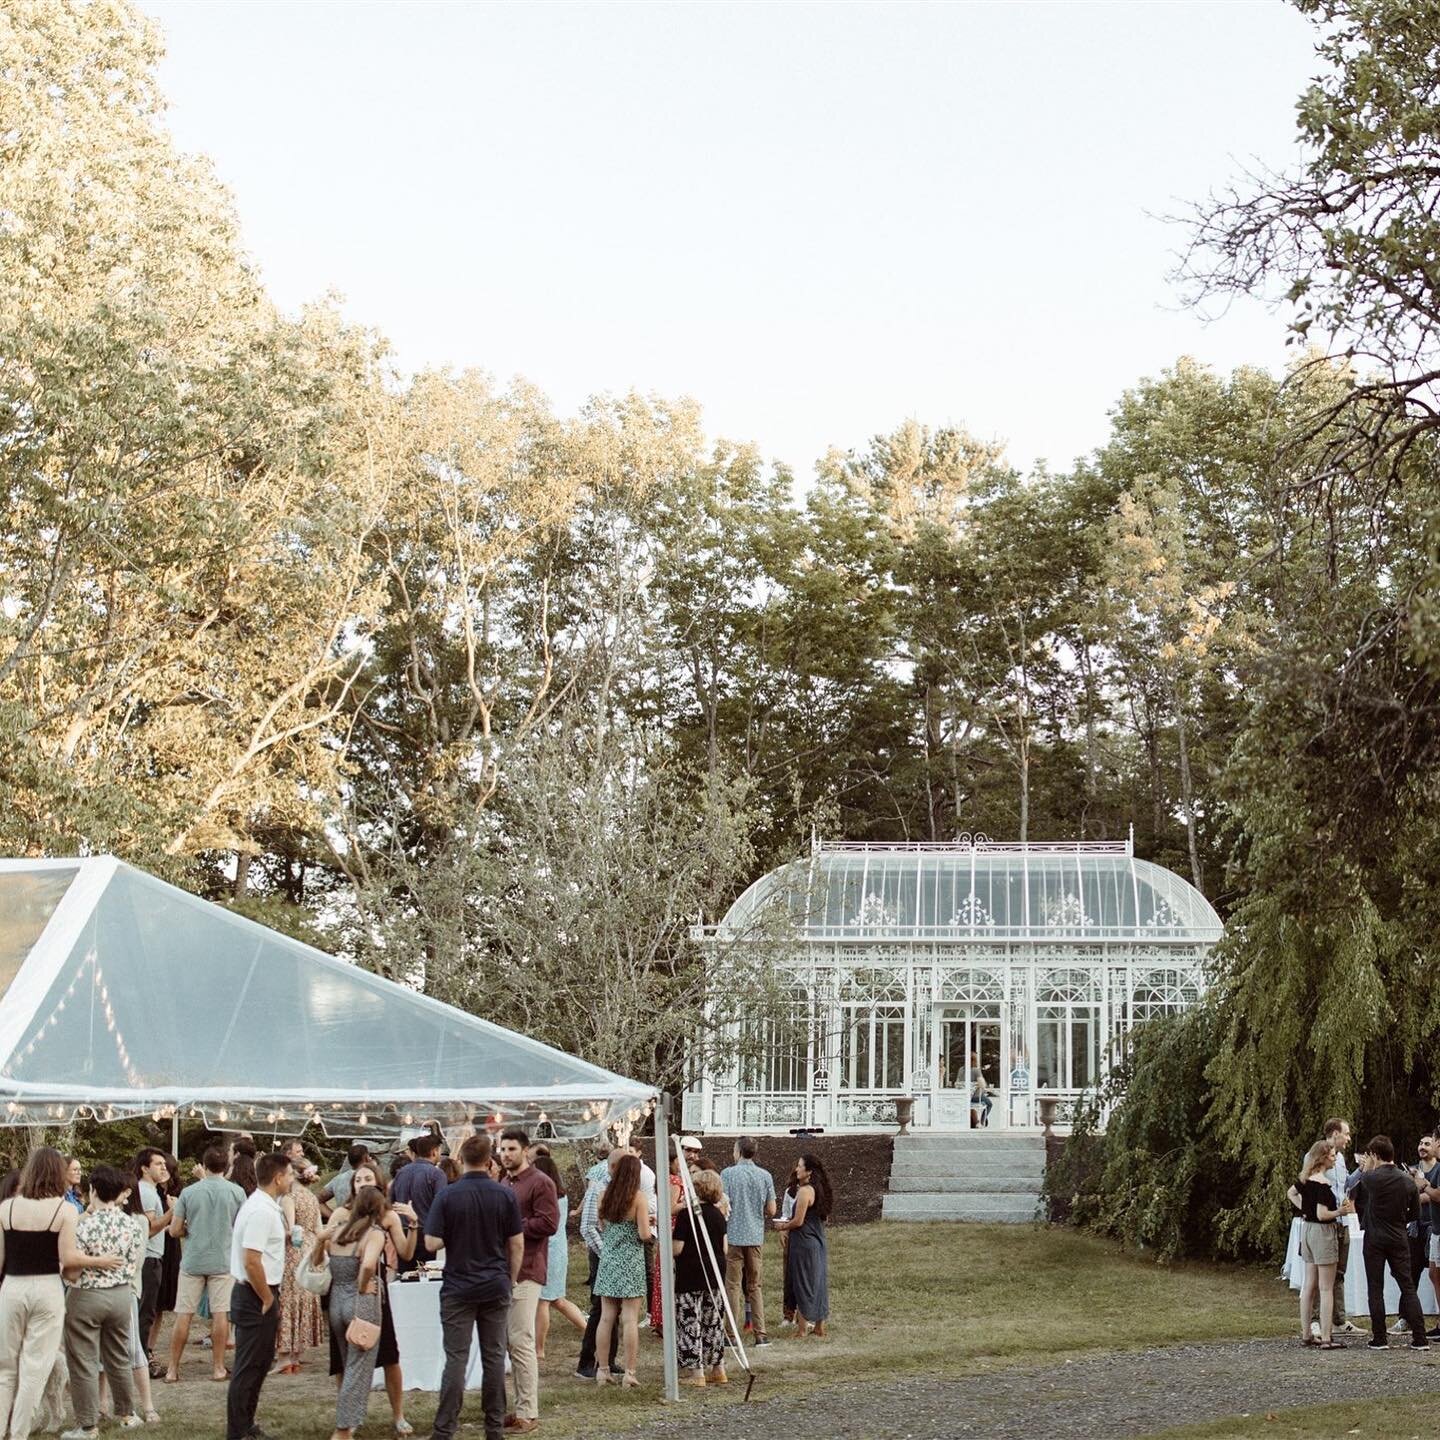 One of our favorite welcome parties to date. The beautiful views, the glass green house, dining Al fresco and enjoying a traditional Maine lobster bake with freshly shucked oysters, what more can you ask for. 

This beautiful Midcoast Maine property 